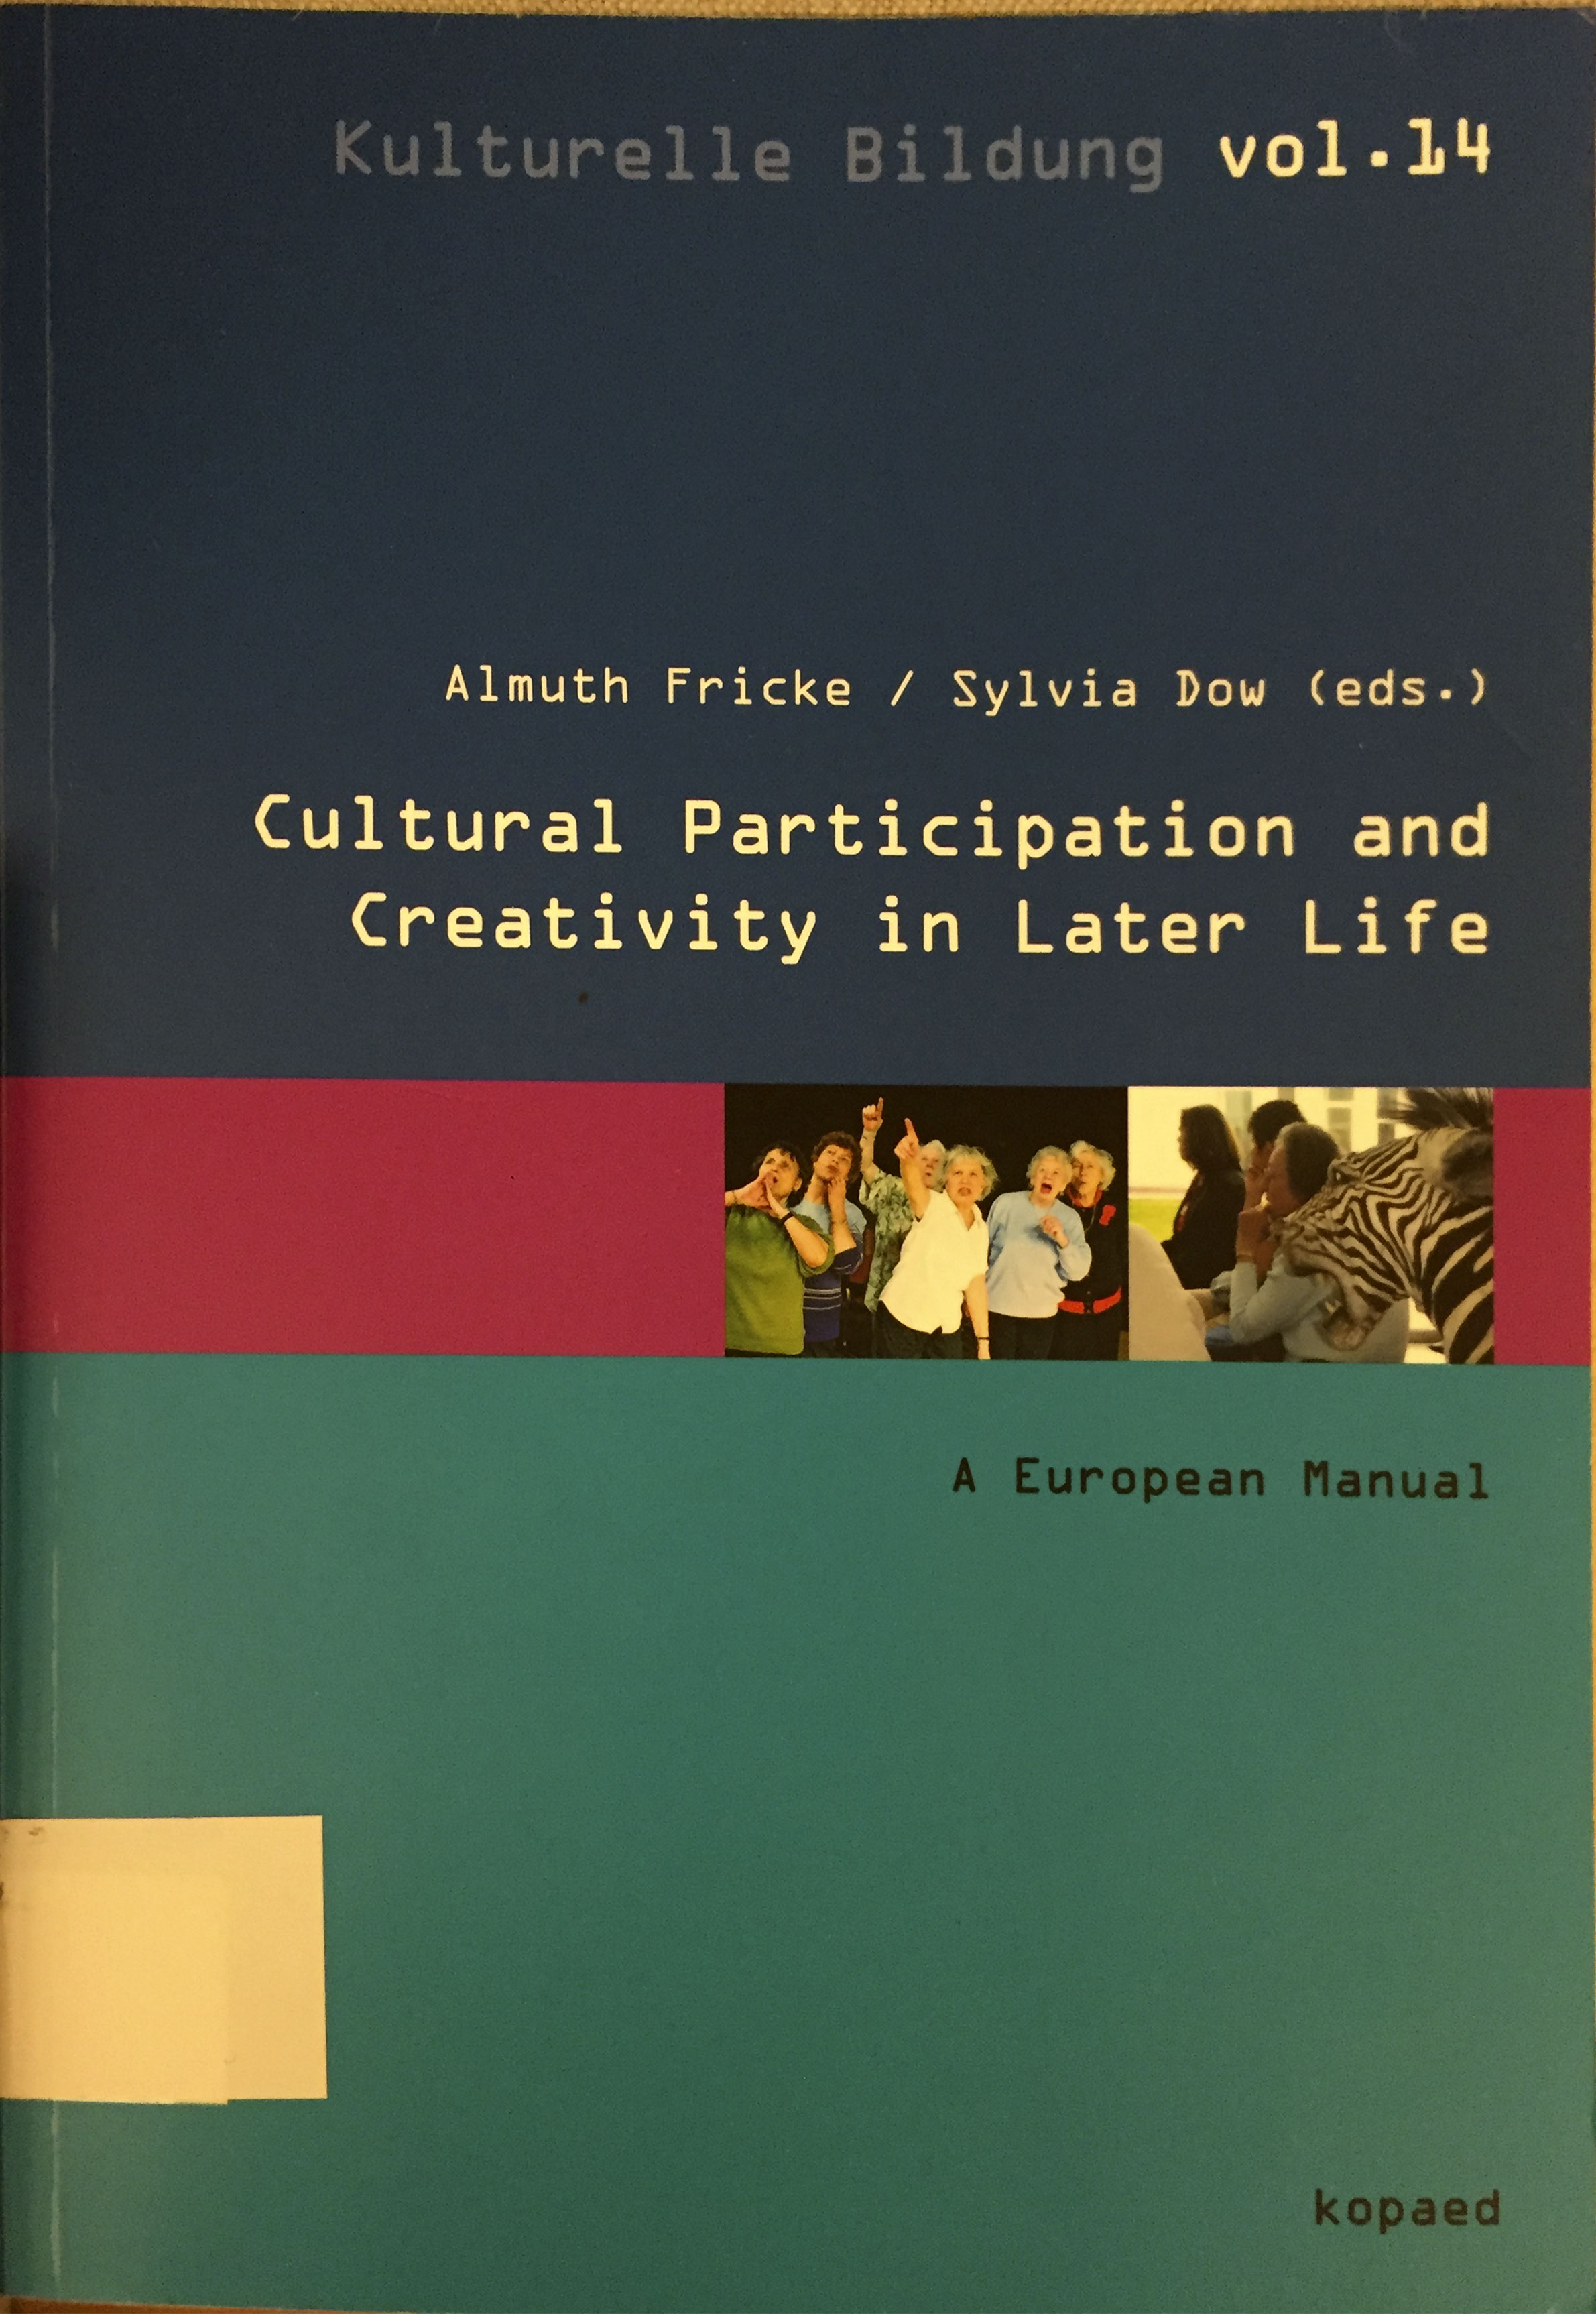 Fricke/Dow: Cultural Participation and Creativity in Later Life